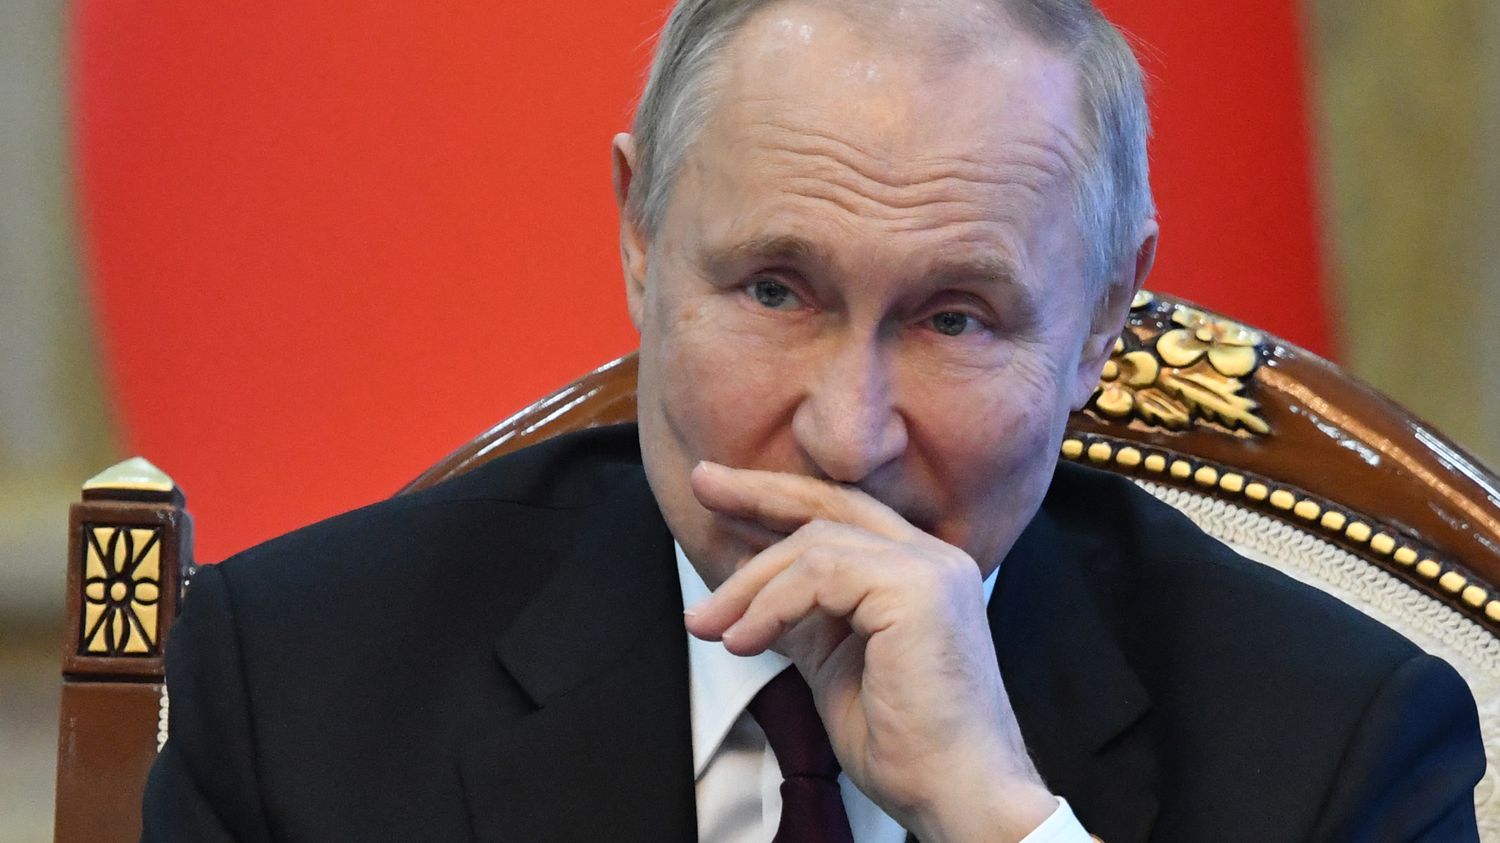 Russia could consider a pre-emptive strike to disarm an enemy, says Vladimir Putin
